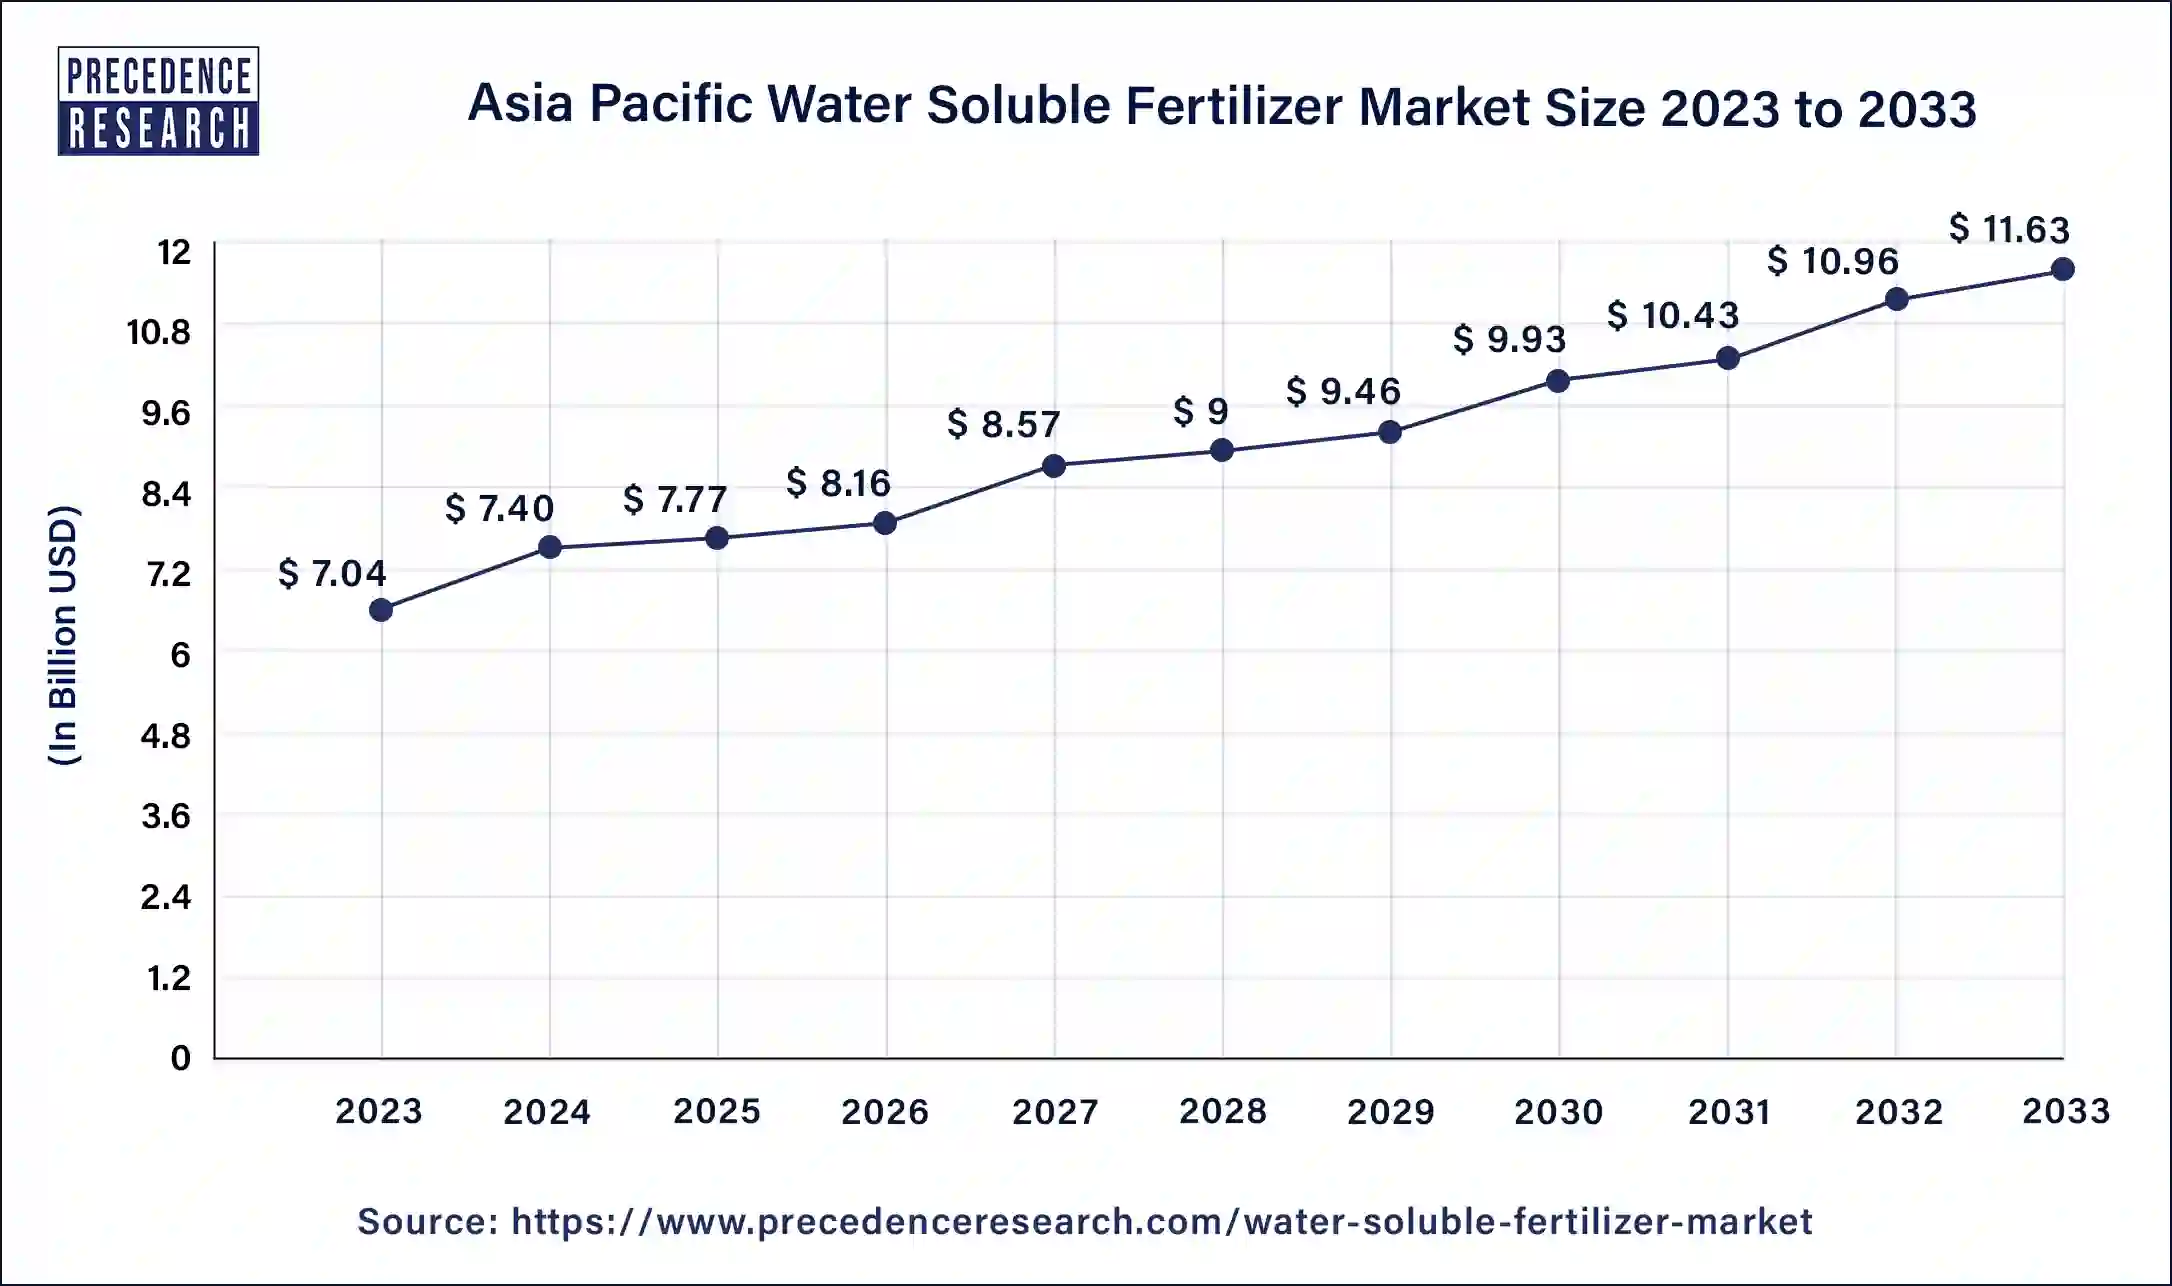 Asia Pacific Water Soluble Fertilizer Market Size 2024 to 2033